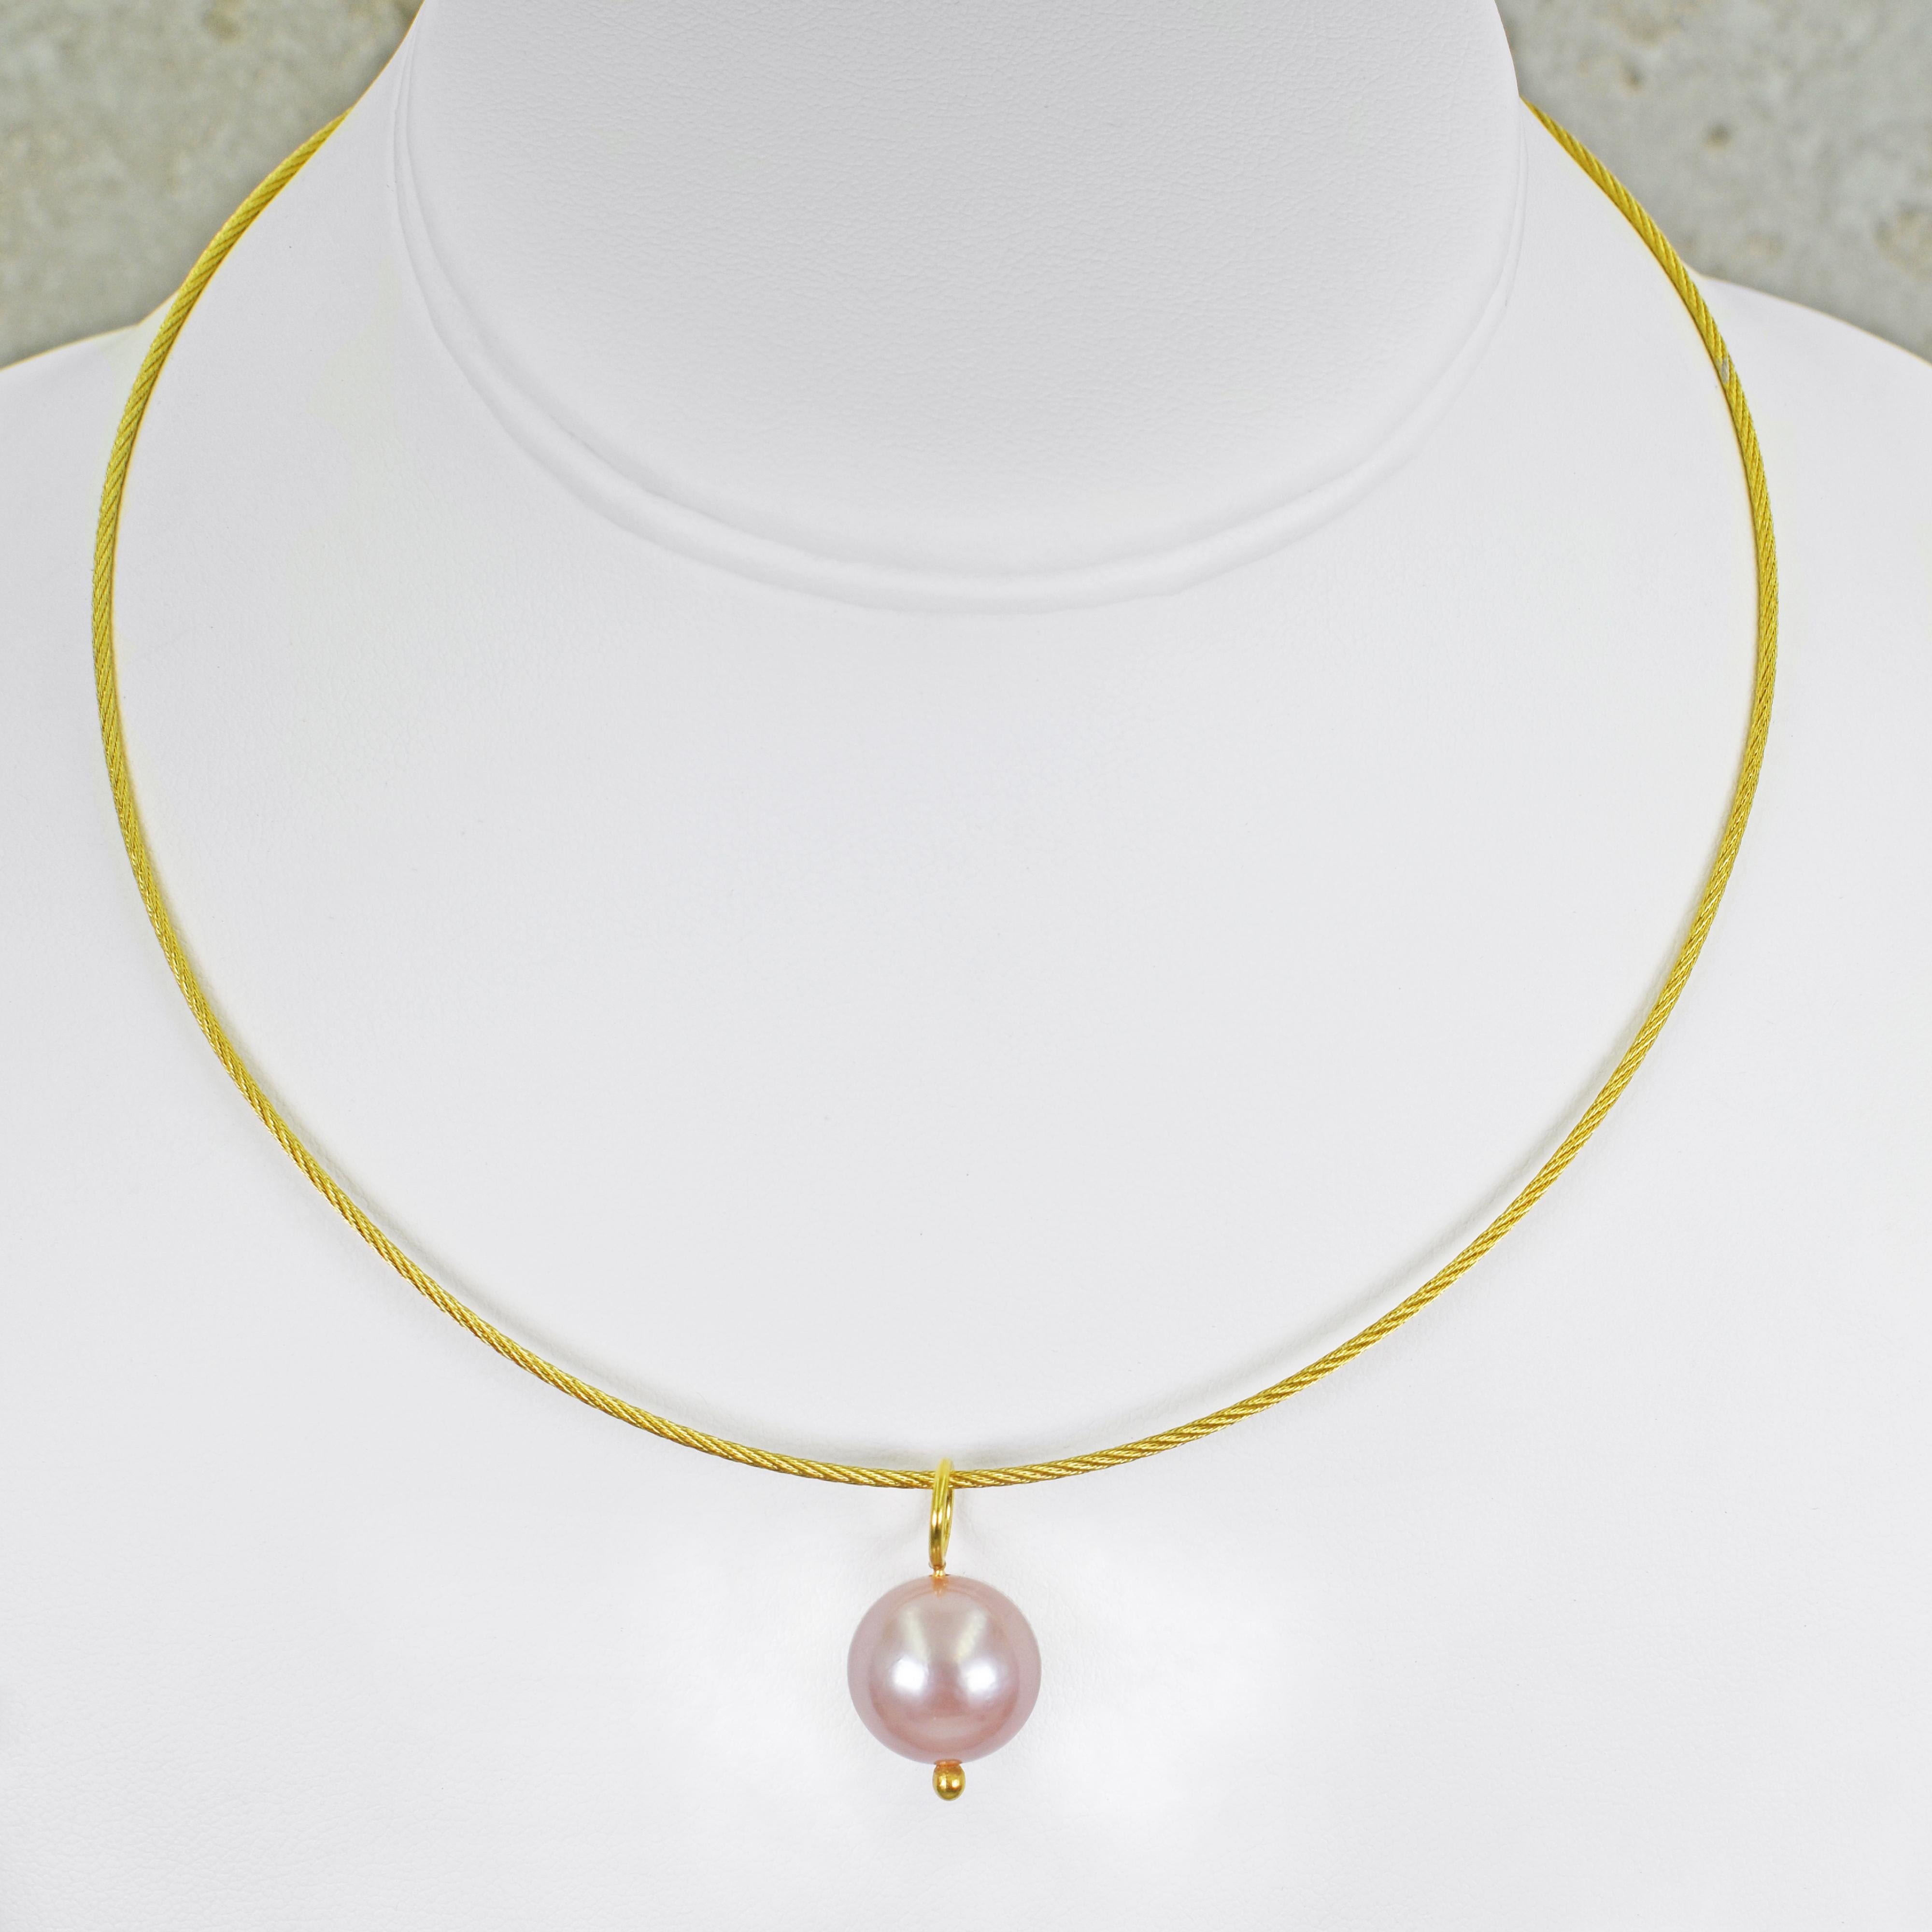 Pink freshwater pearl and 18k yellow gold pendant necklace and drop earring set. Necklace is composed of a round 14.5mm pink pearl pendant on a 16 inch 18k gold woven cable wire necklace and finished with a safety clasp (crocodile clasp). Earrings